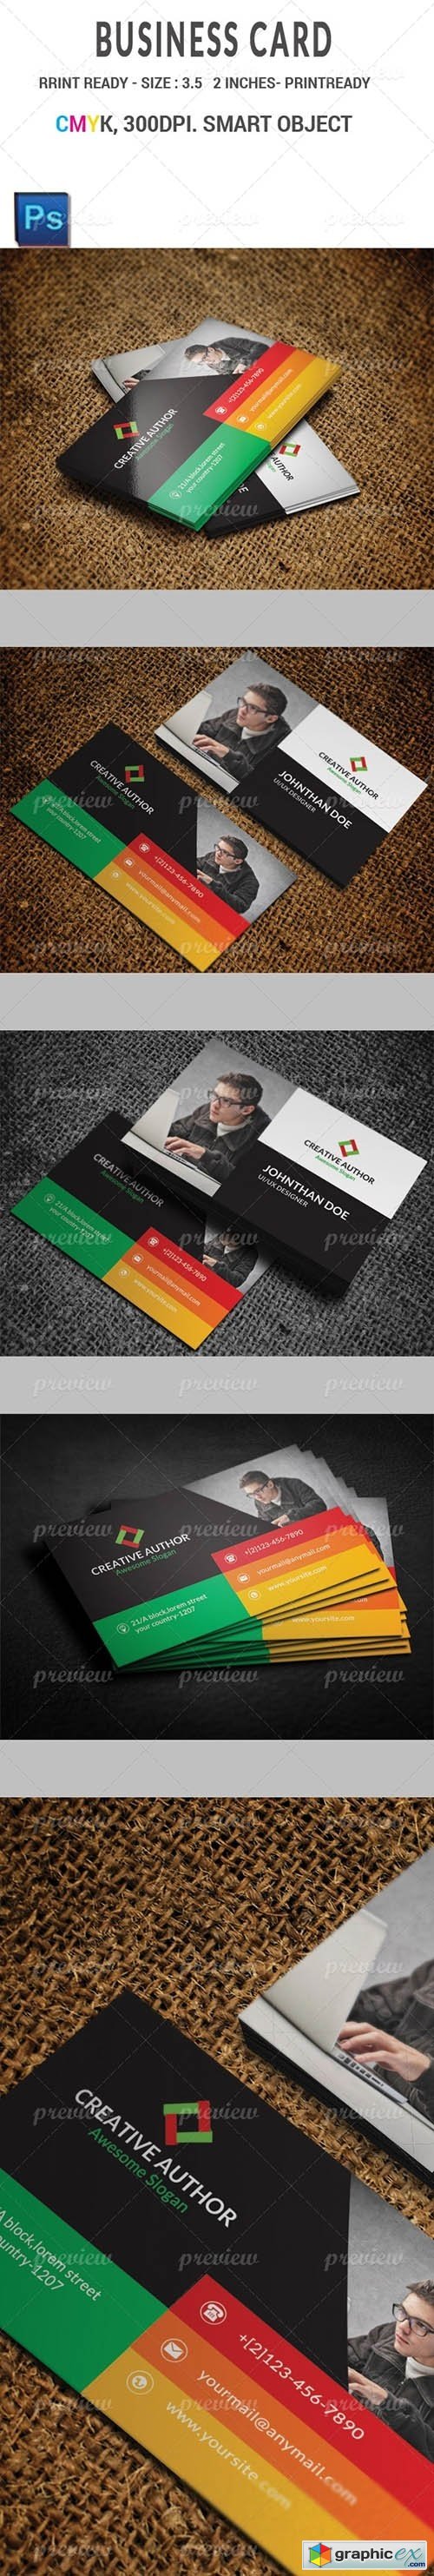 CodeGrape Agency Corporate Business Card